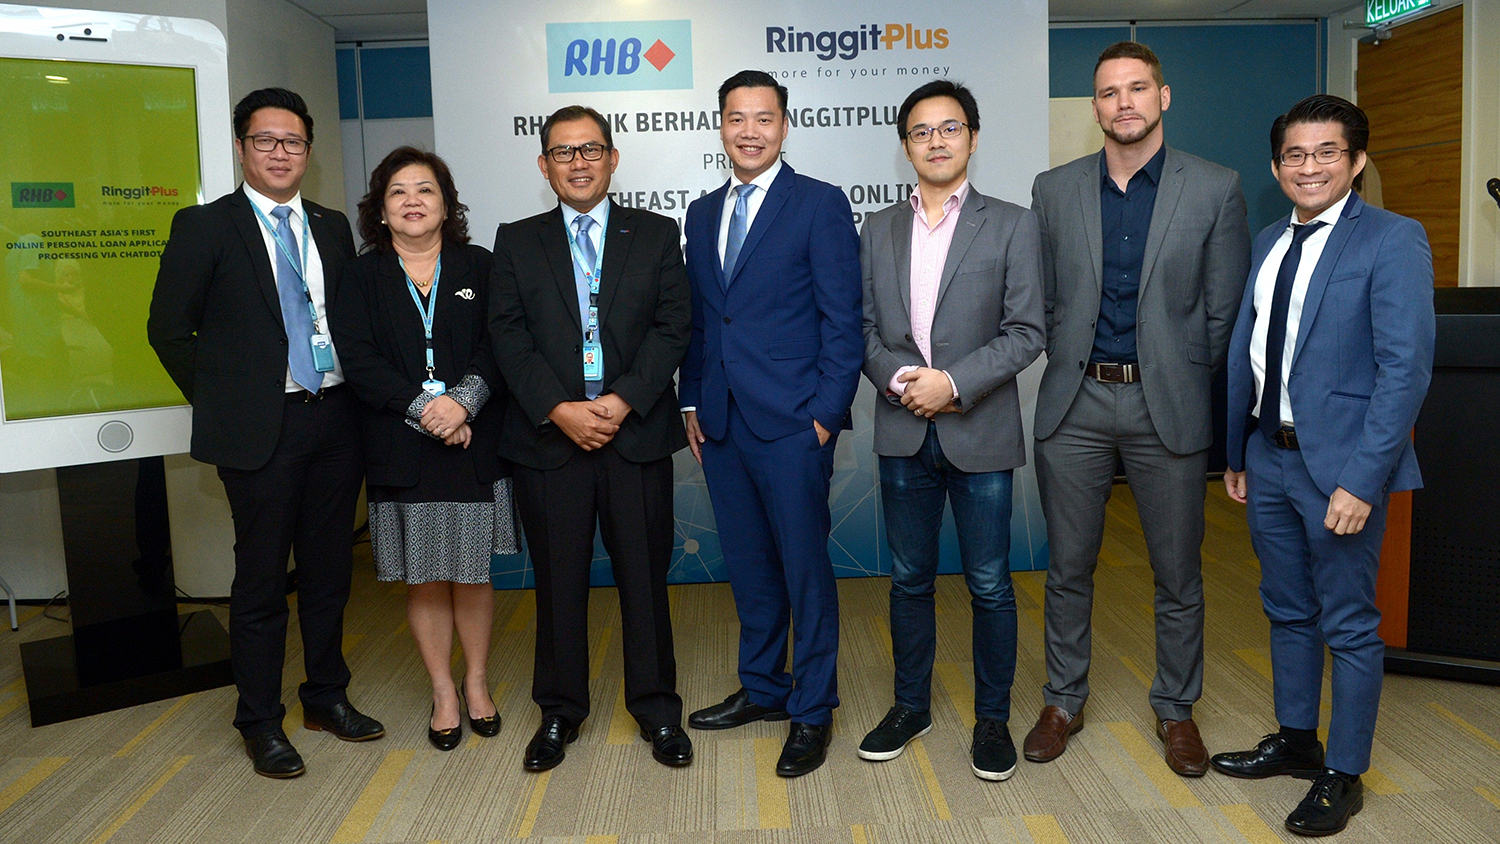 Rhb Ringgitplus Introduce Chatbot To Facilitate Personal Loan